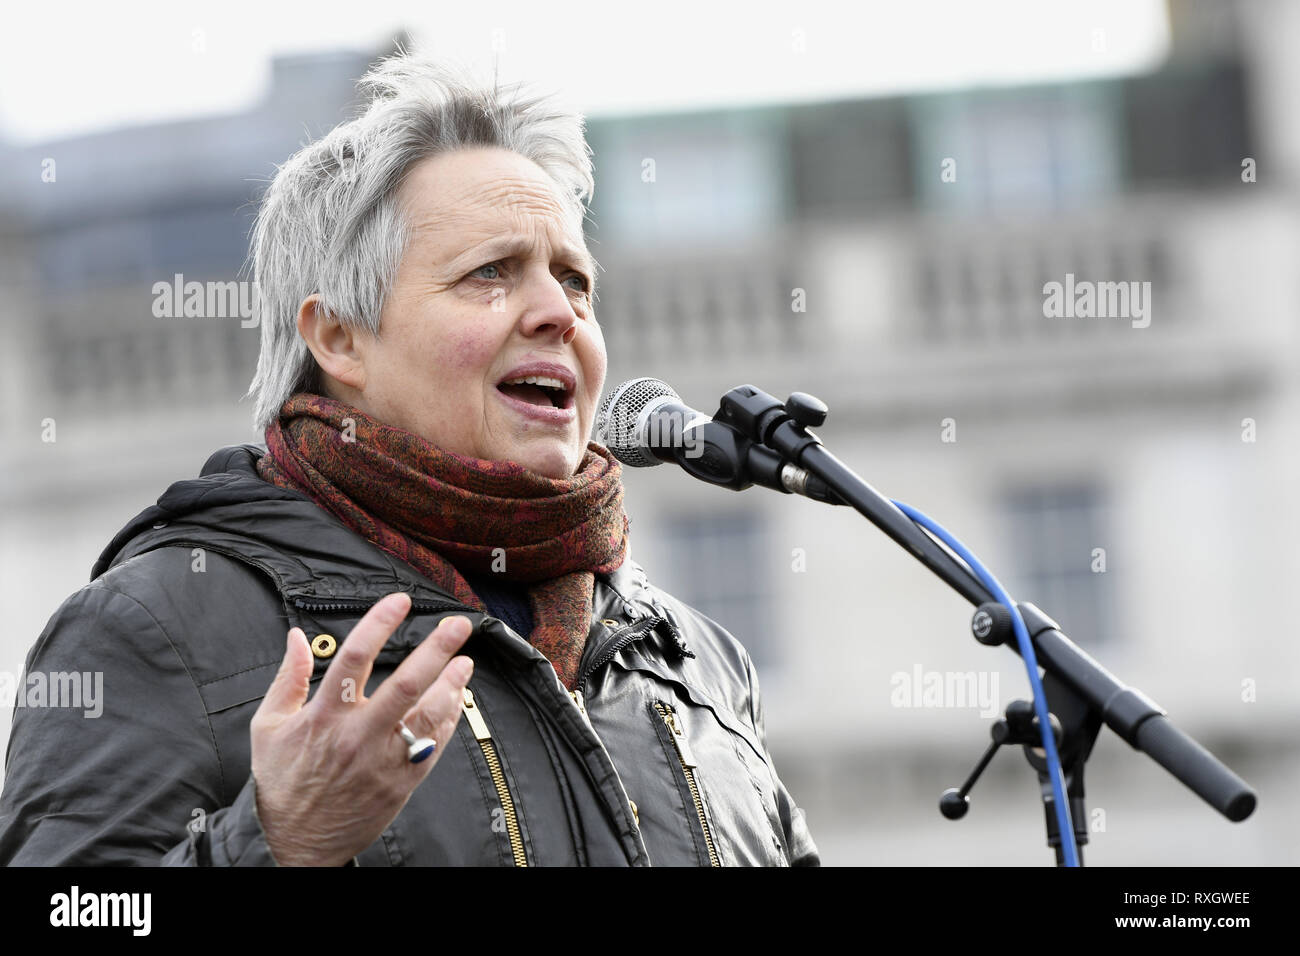 London, Greater London, UK. 9th Mar, 2019. Speaker gave a passionate speech to protesters at the Million women's rise rally in London.Thousands of women marched through central London to a rally in Trafalgar Square in London demanding freedom and justice and the end of male violence against them. ''˜Never Forgotten' was the theme for this year's march and participants commemorated the lives of girls and women who have been killed by mens's violence. Credit: Andres Pantoja/SOPA Images/ZUMA Wire/Alamy Live News Stock Photo